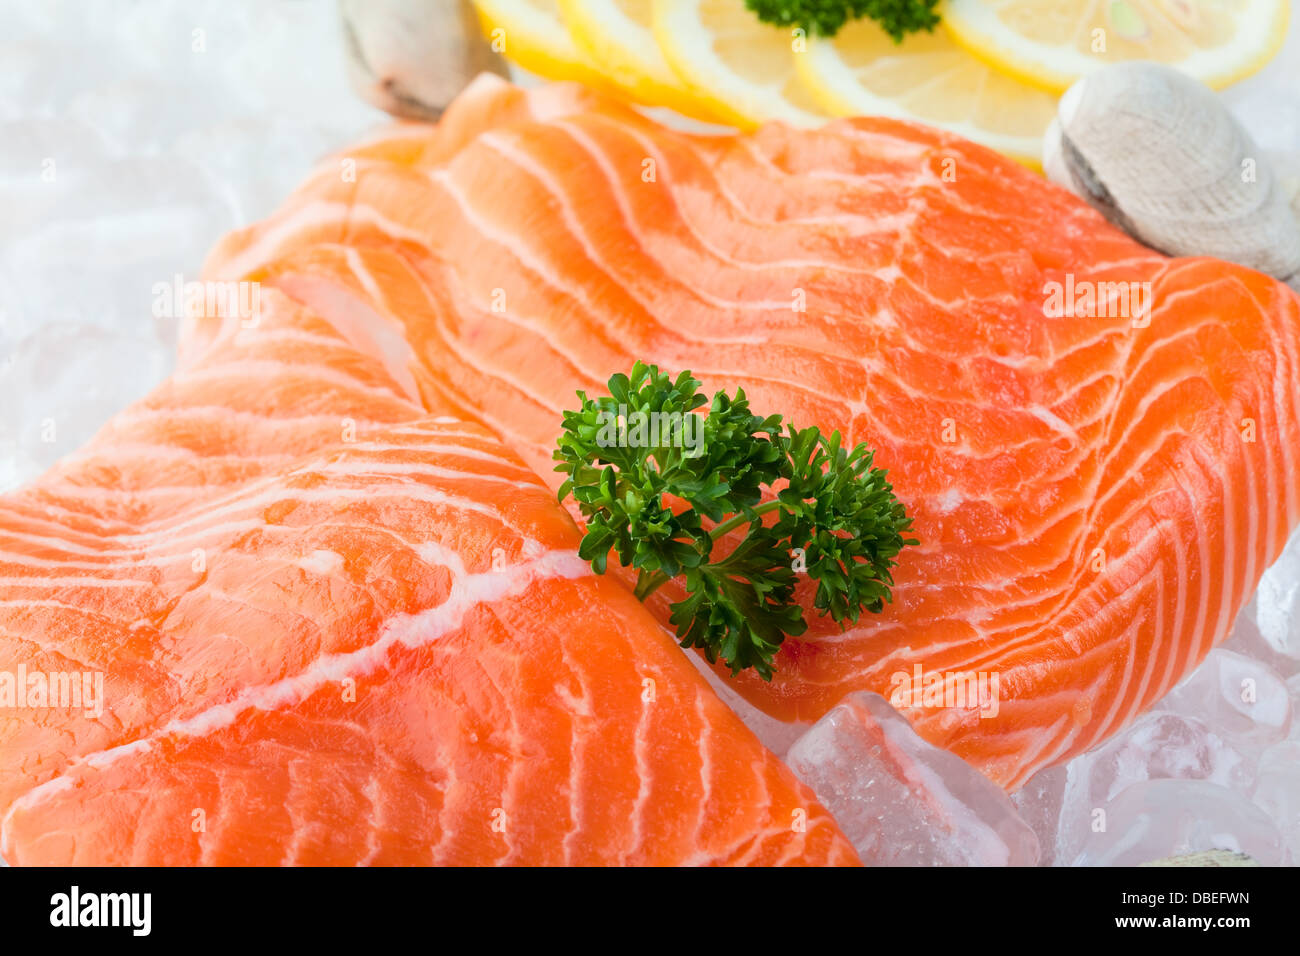 Fresh fillets of salmon on ice with clams and lemon Stock Photo